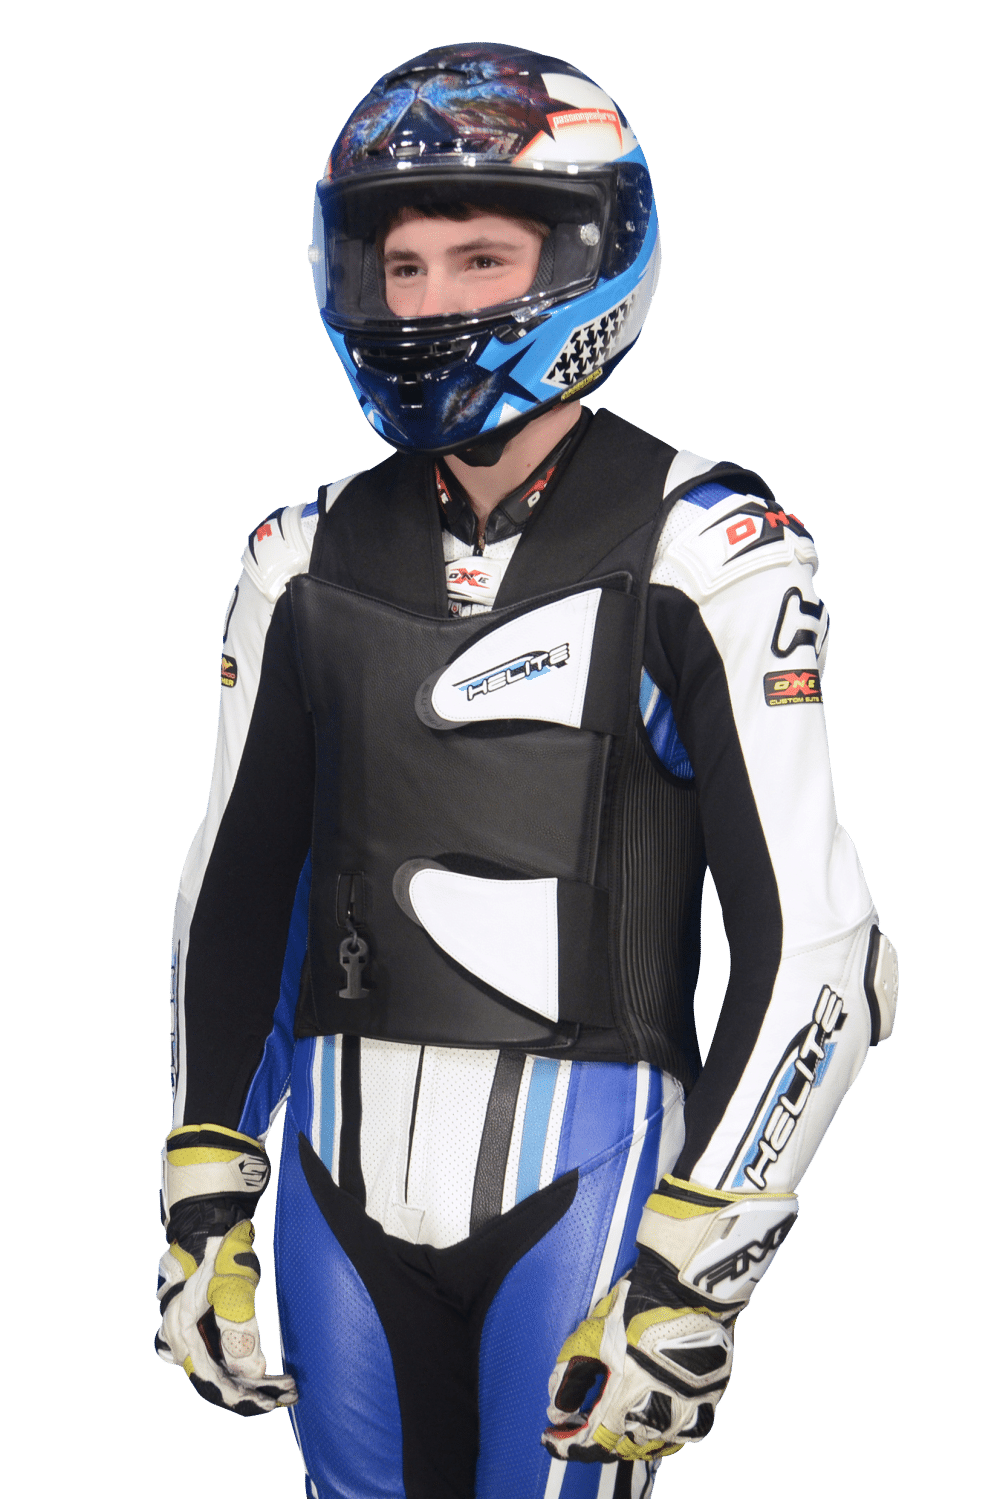 Bike rider showing the GP Air Track safety vest's front view